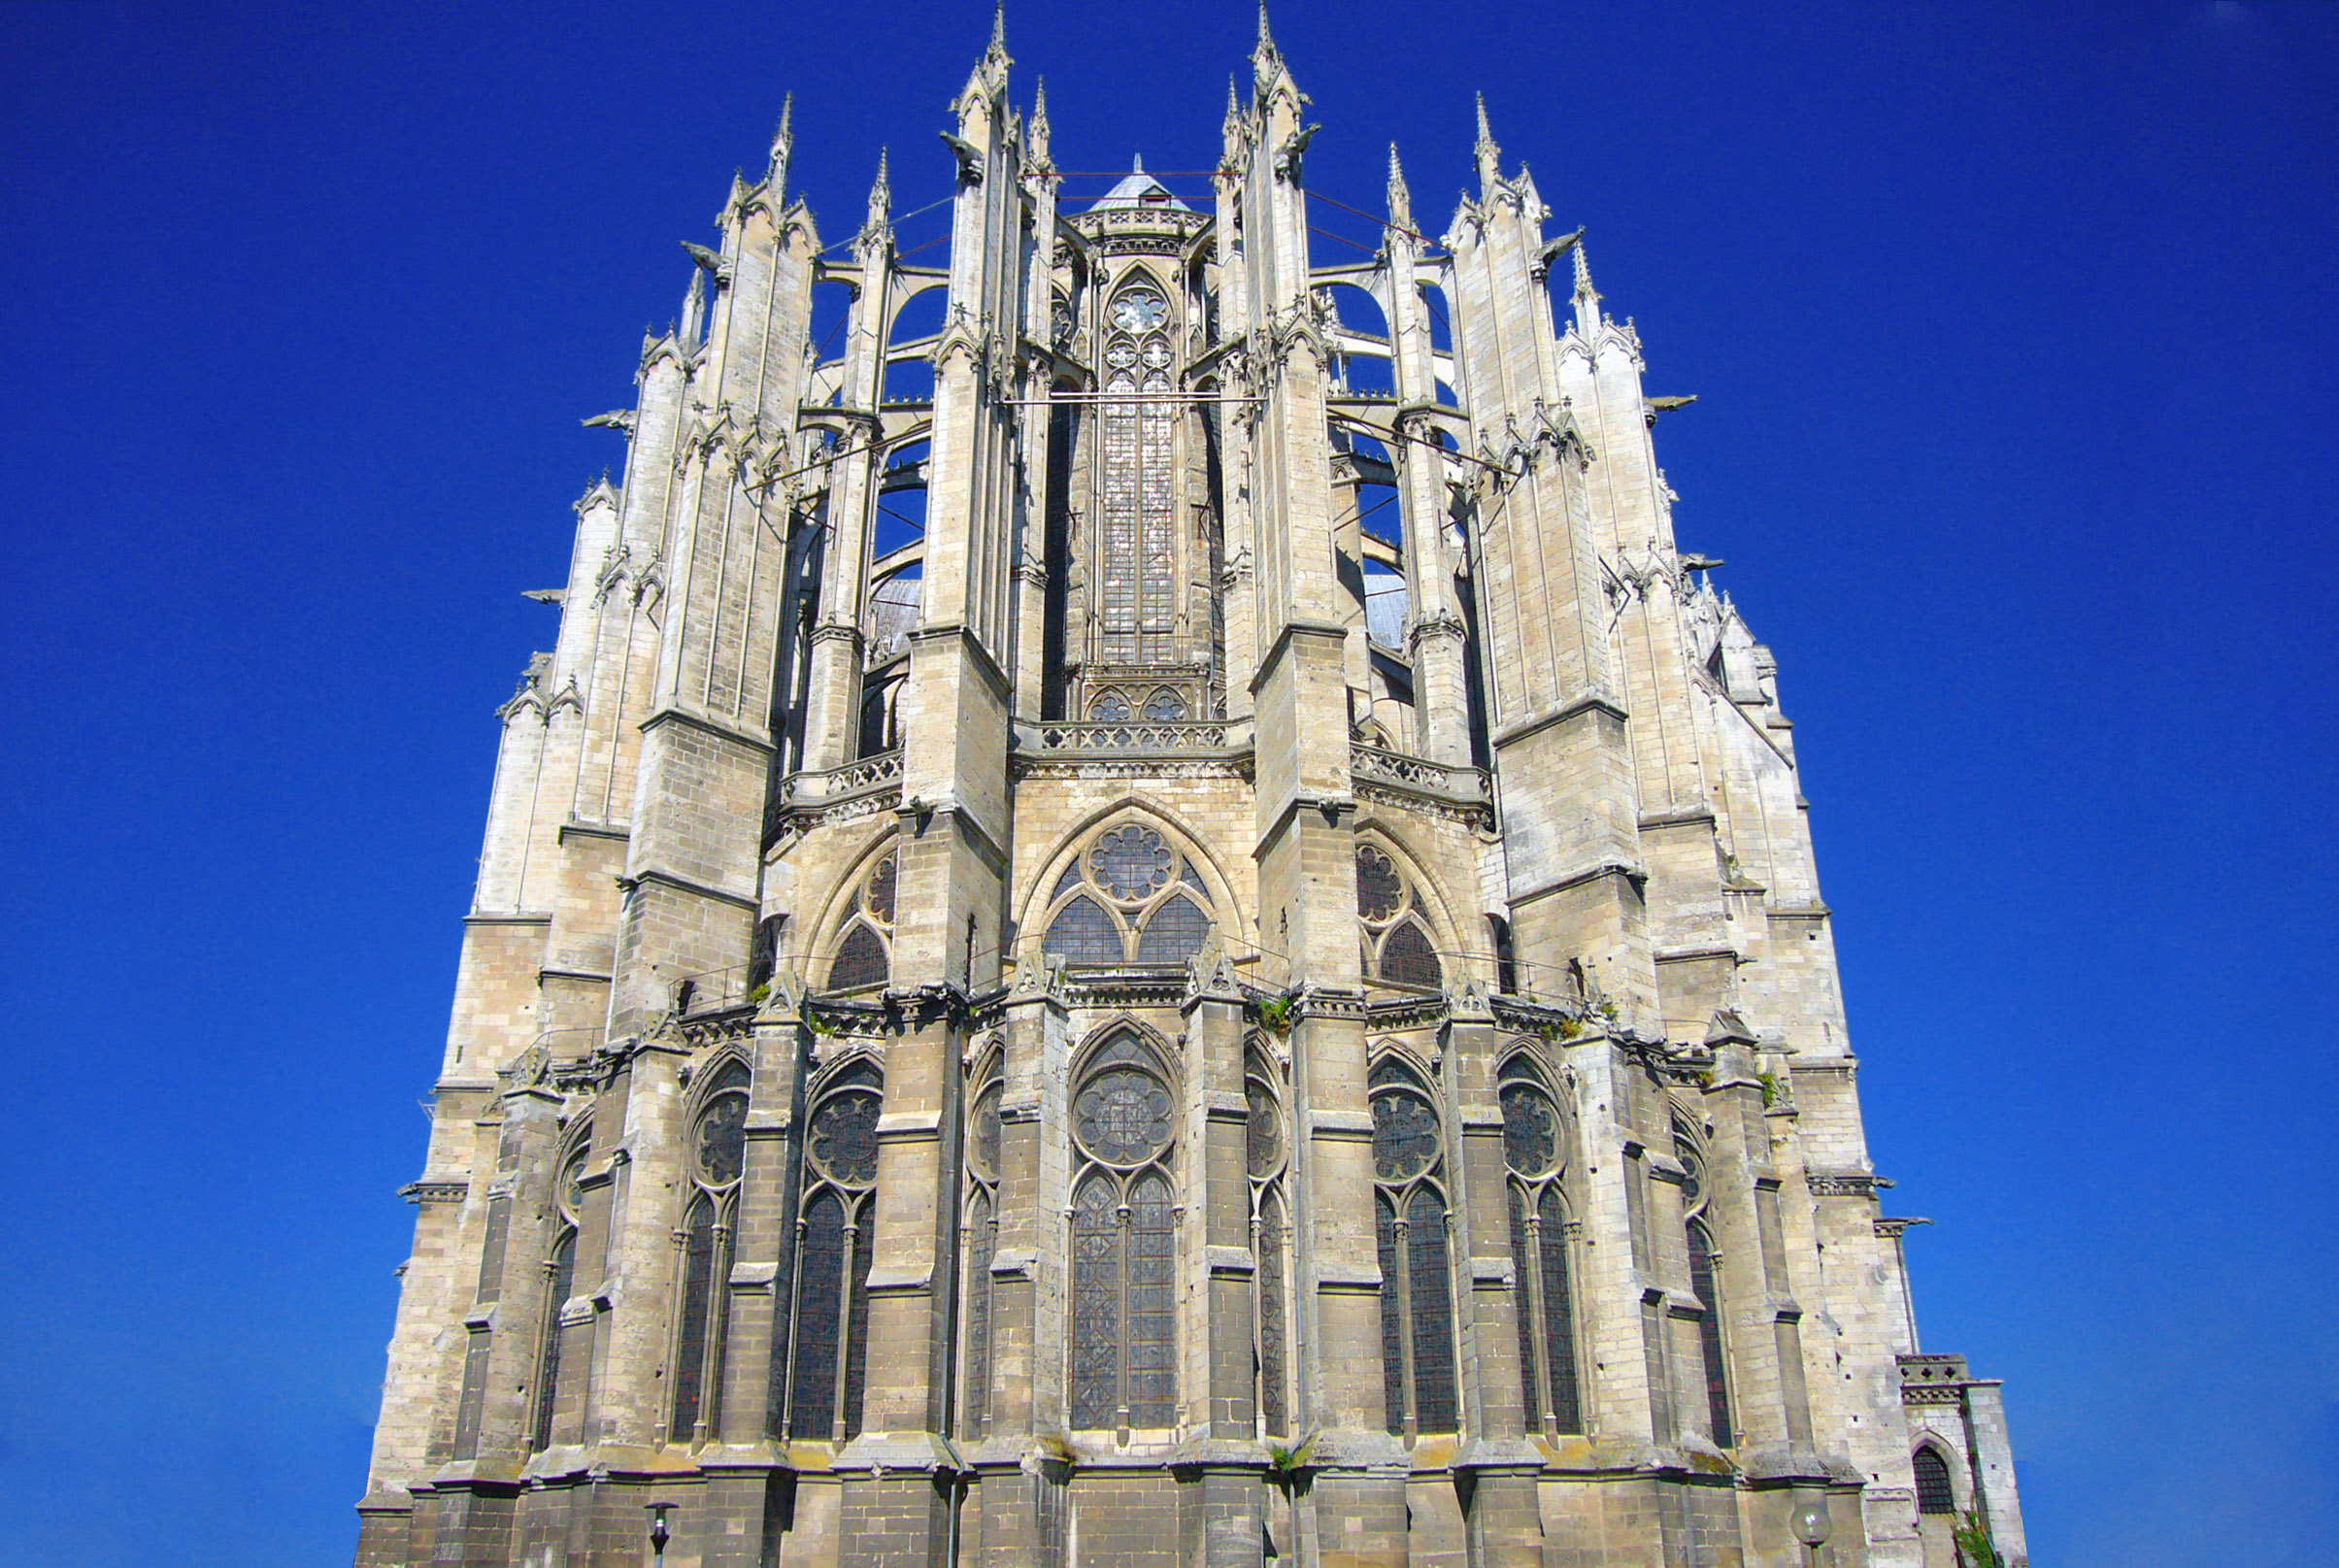 Beauvais Cathedral by Pepijntje [public domain]